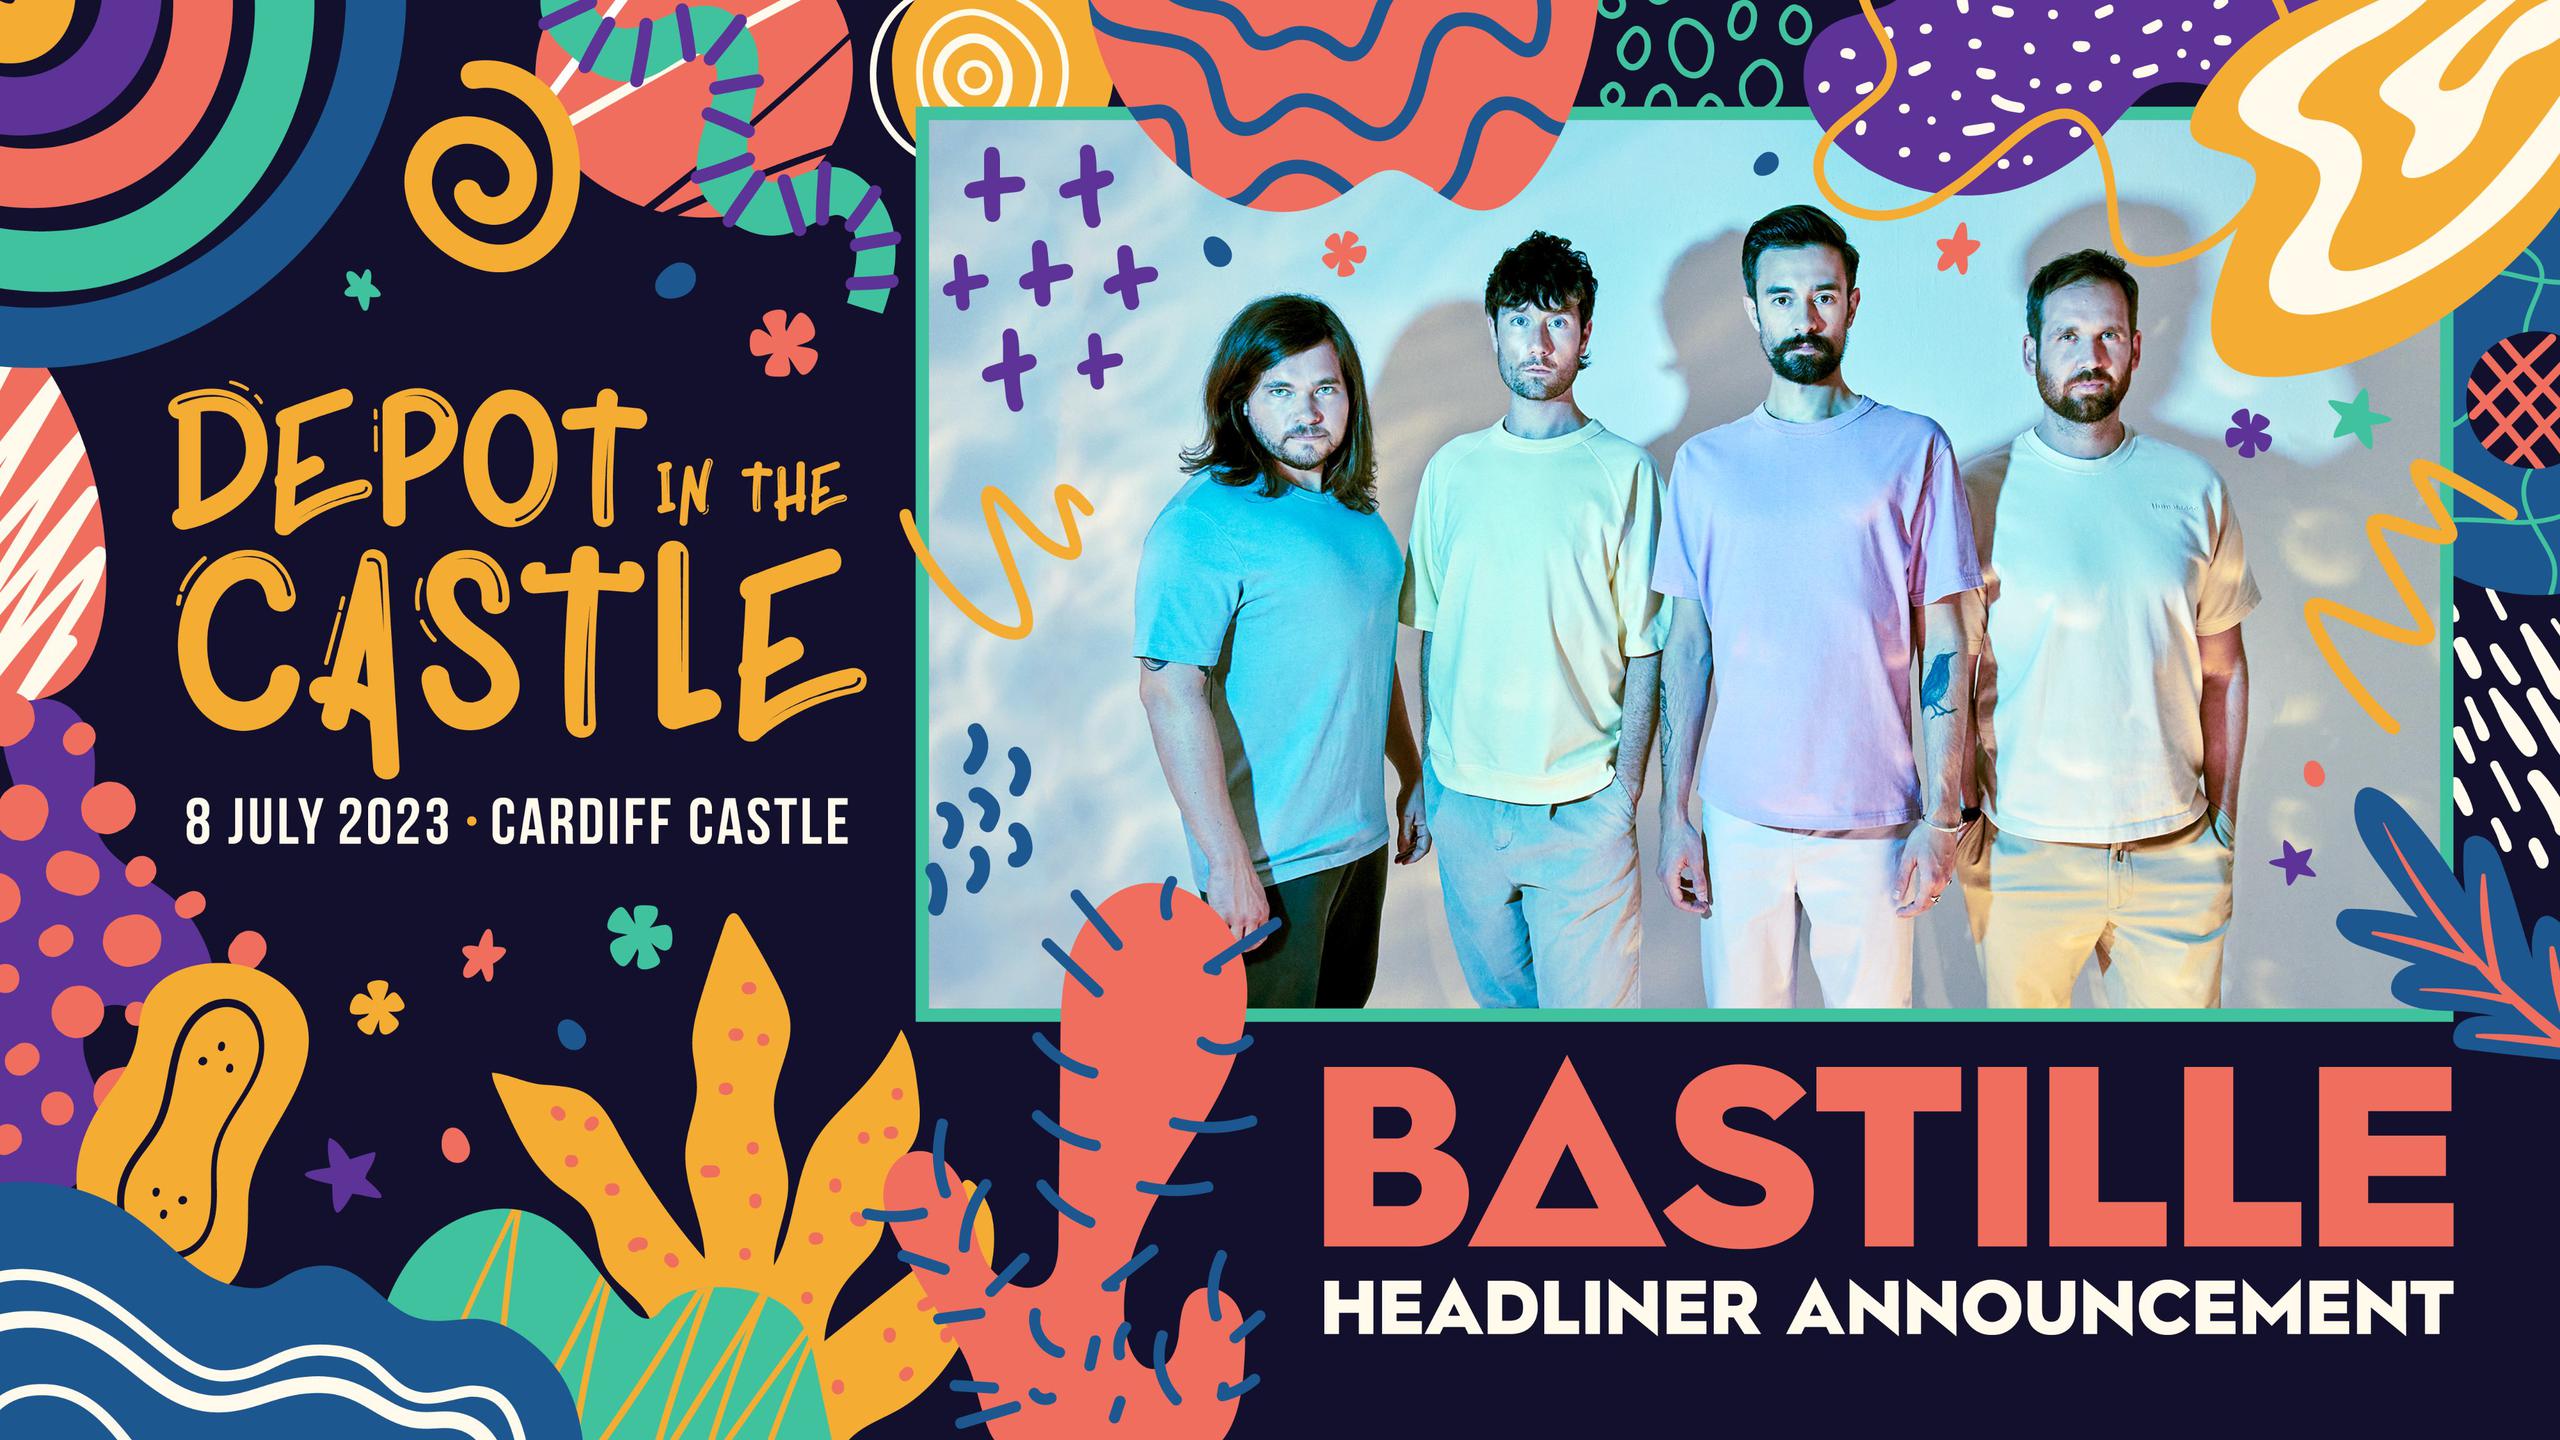 Bastille concert tickets for Cardiff Castle, Cardiff Saturday, 8 July